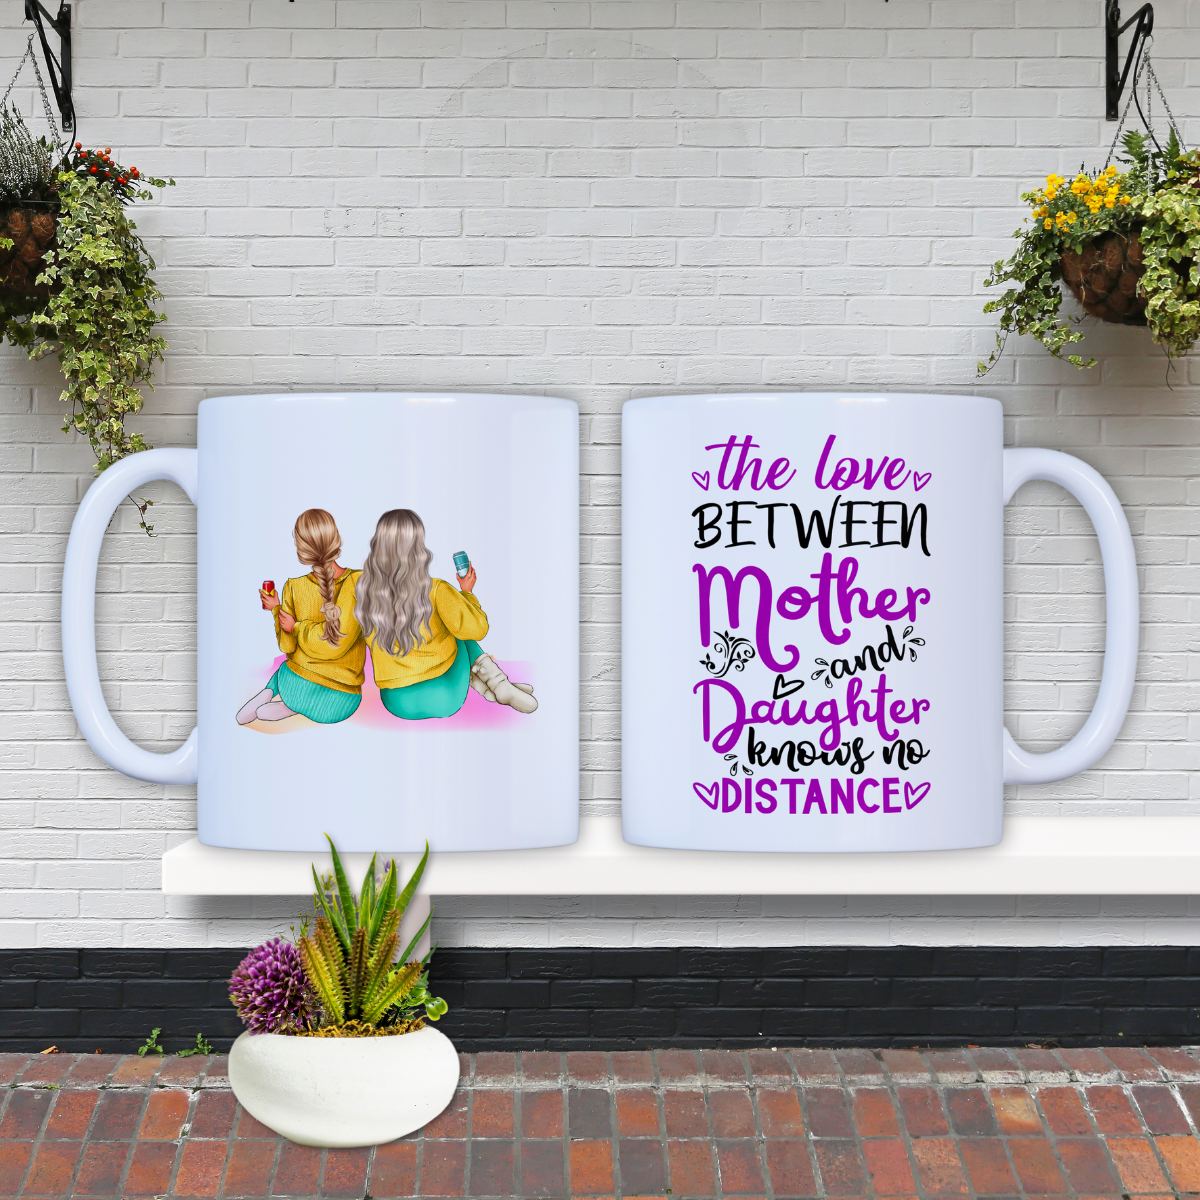 The Love Between Mother and Daughter Knows No Distance-Personalized Mug for Mom and Daughter